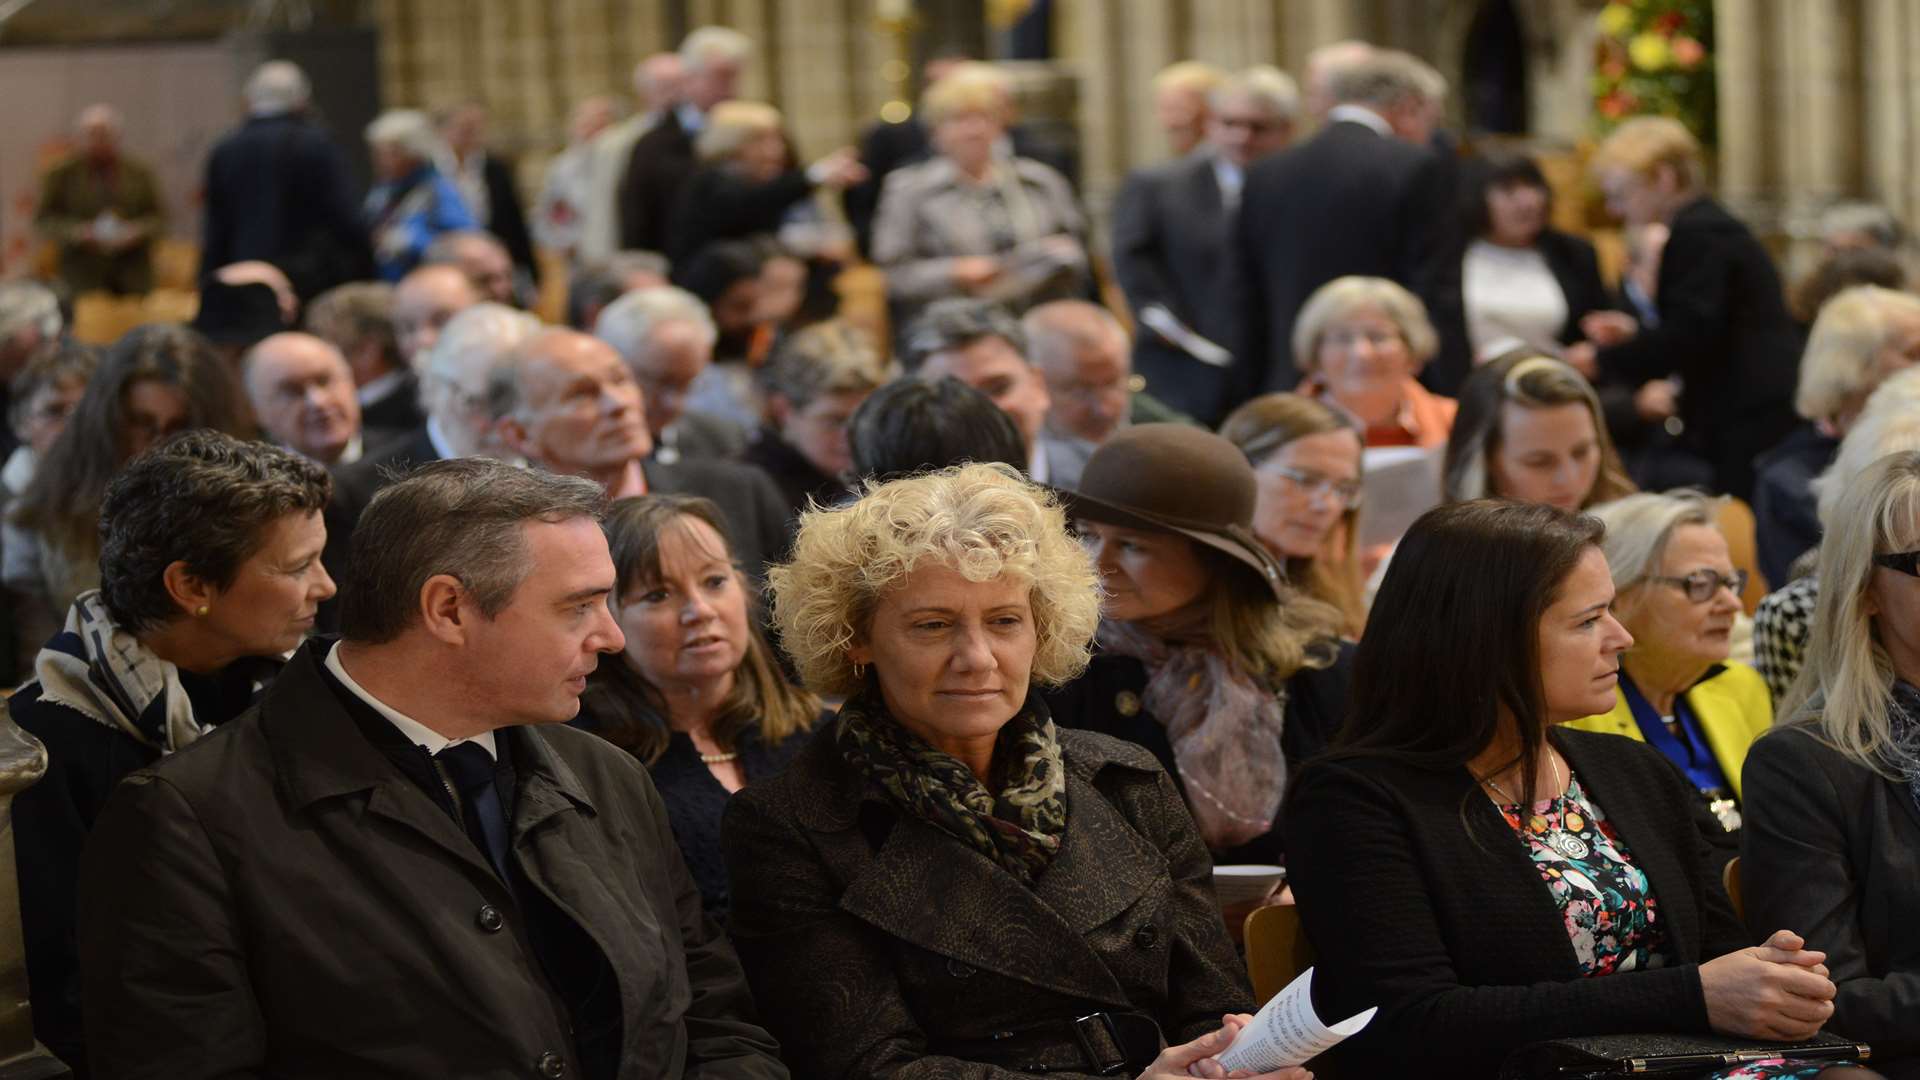 The cathedral was packed for the 300th anniversary service